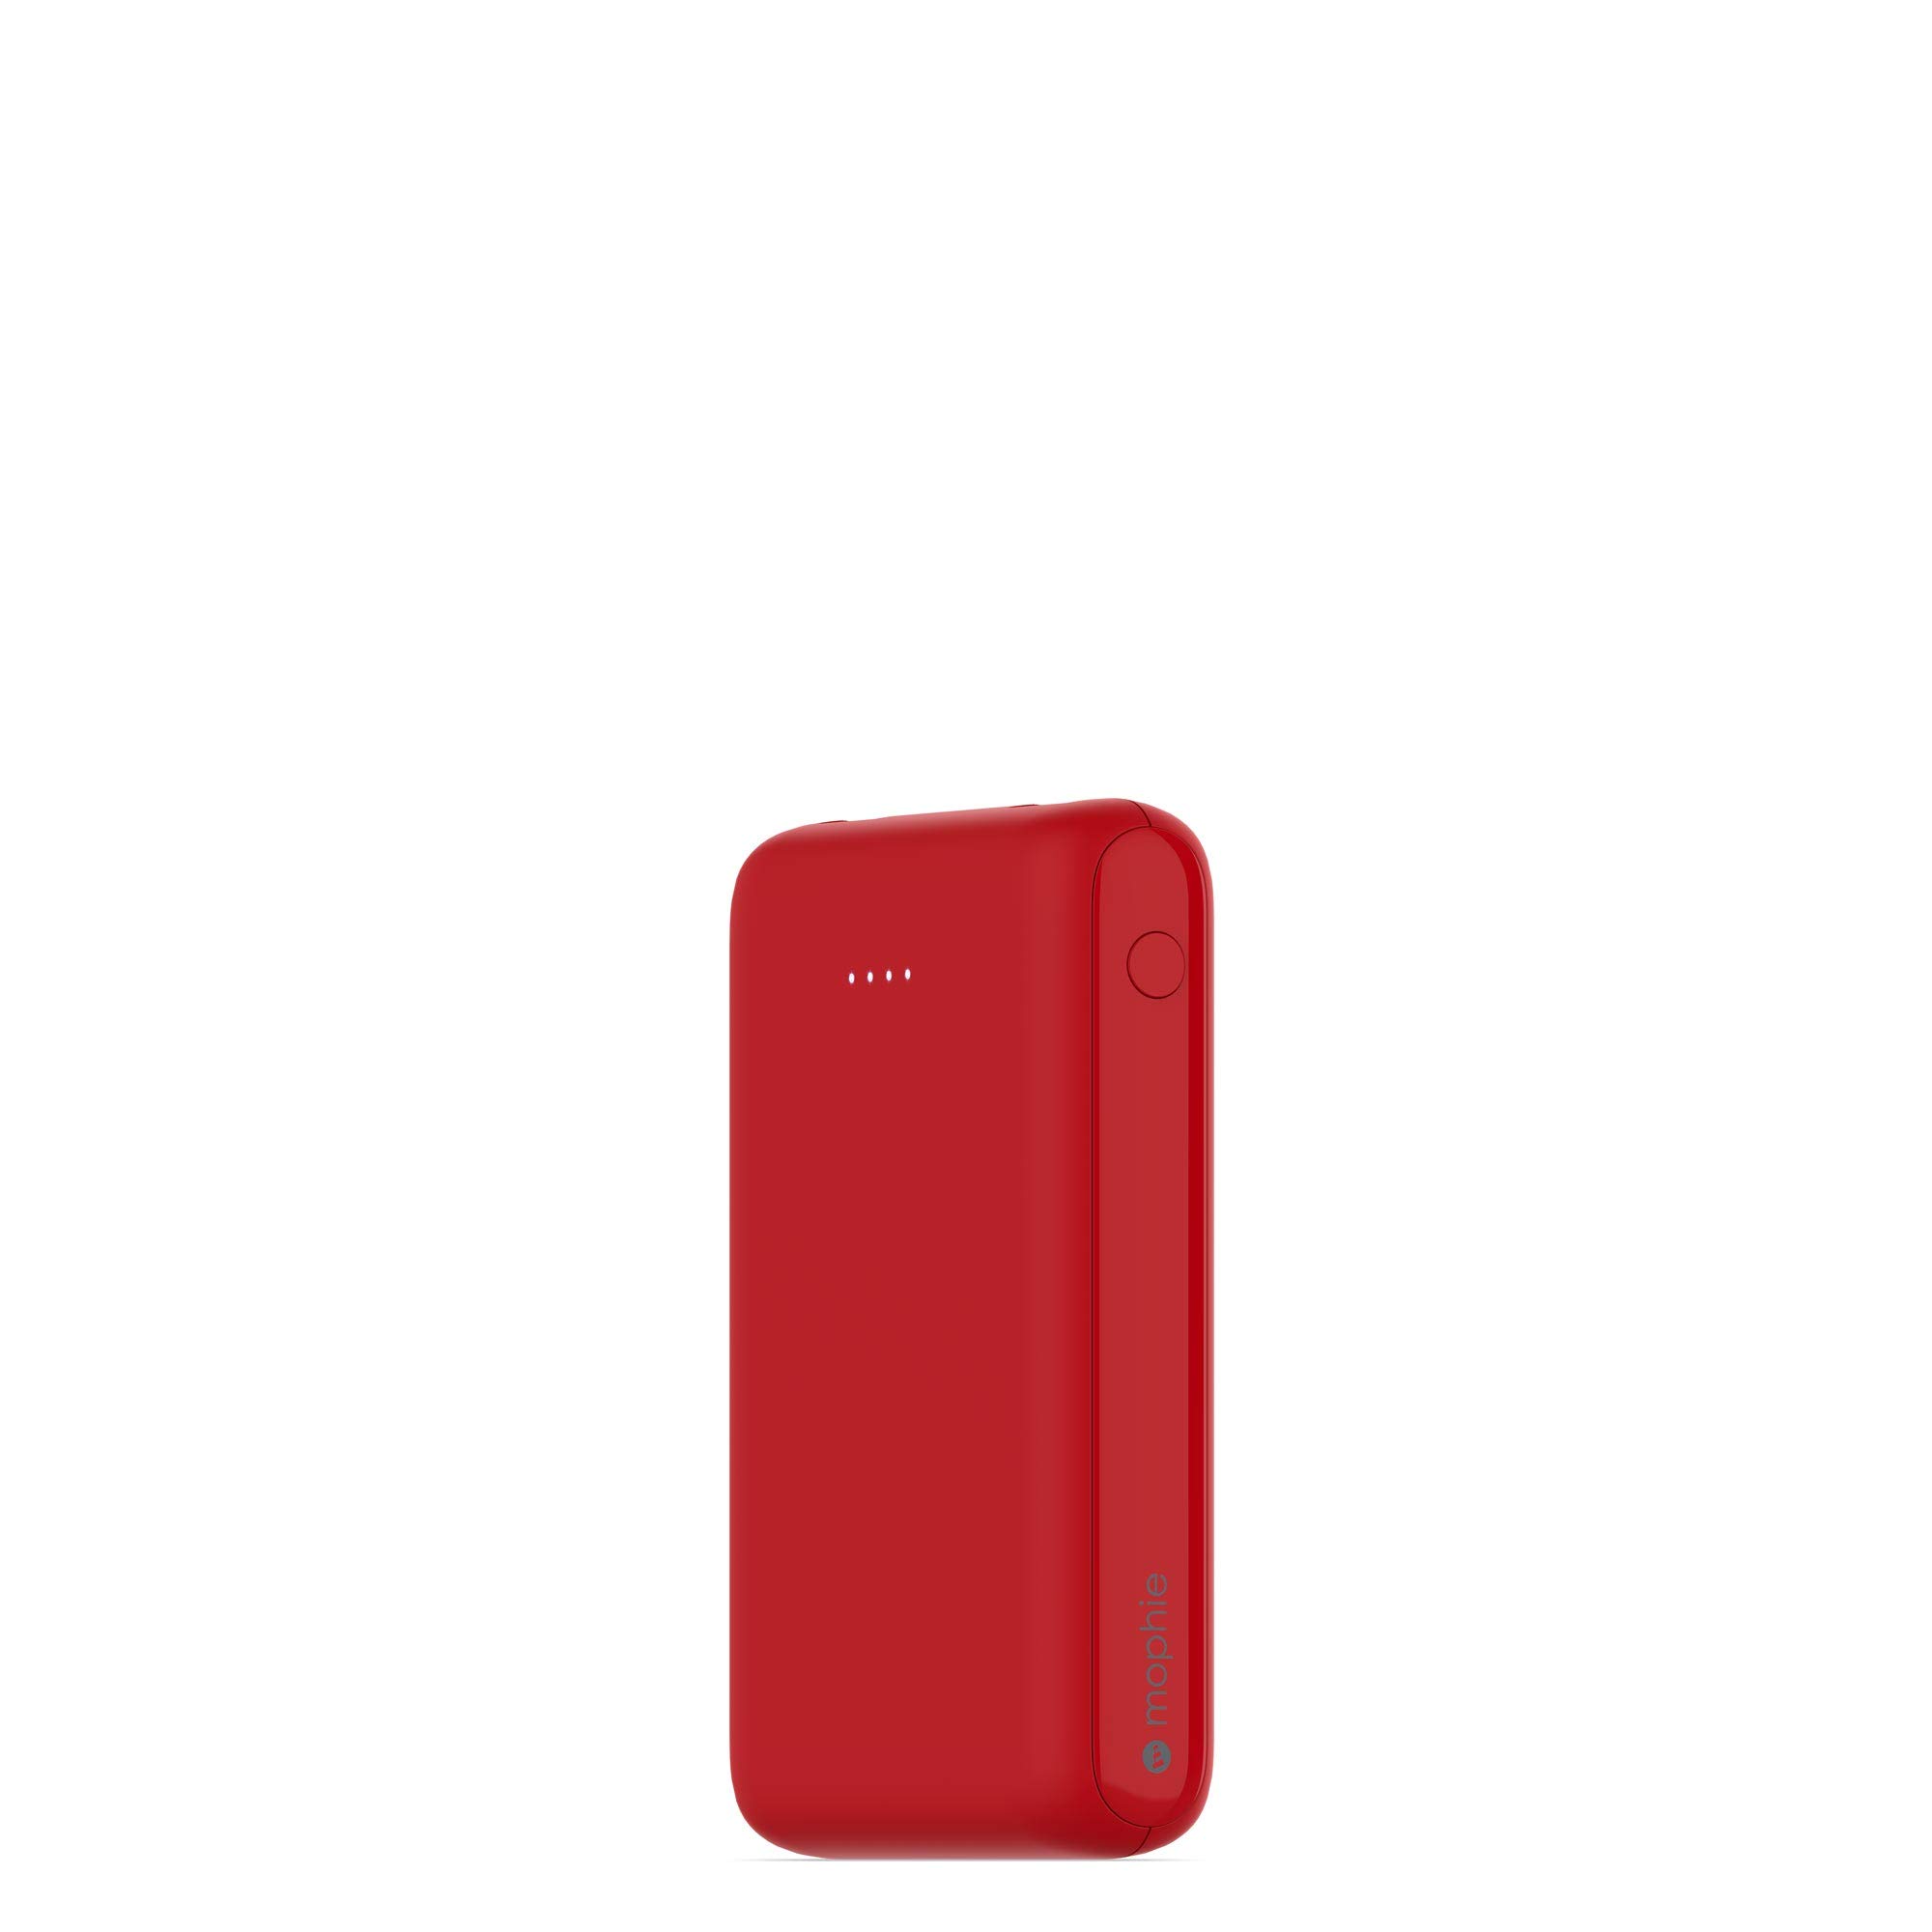 Portable Charger with Universal Compatibility